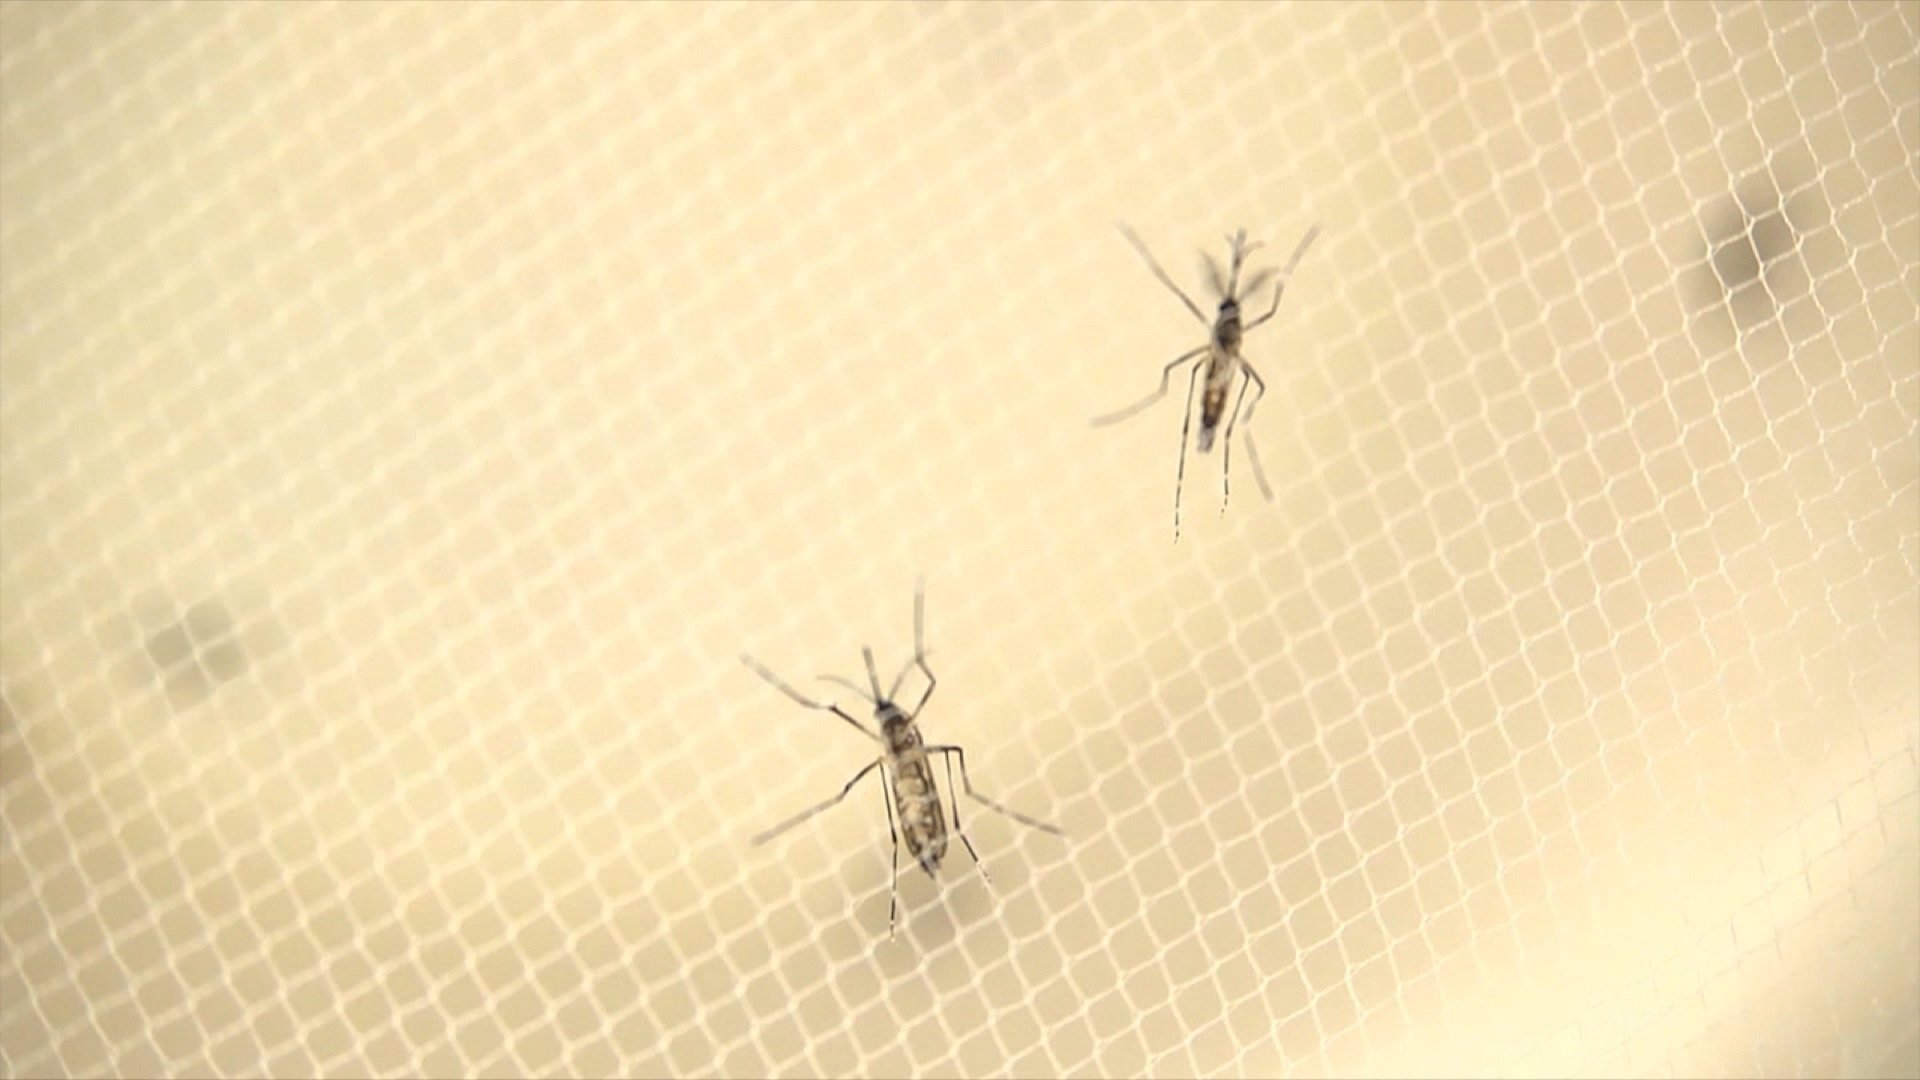 The WHO anticipates the Zika virus will likely spread to all but two countries in South, Central and North America.